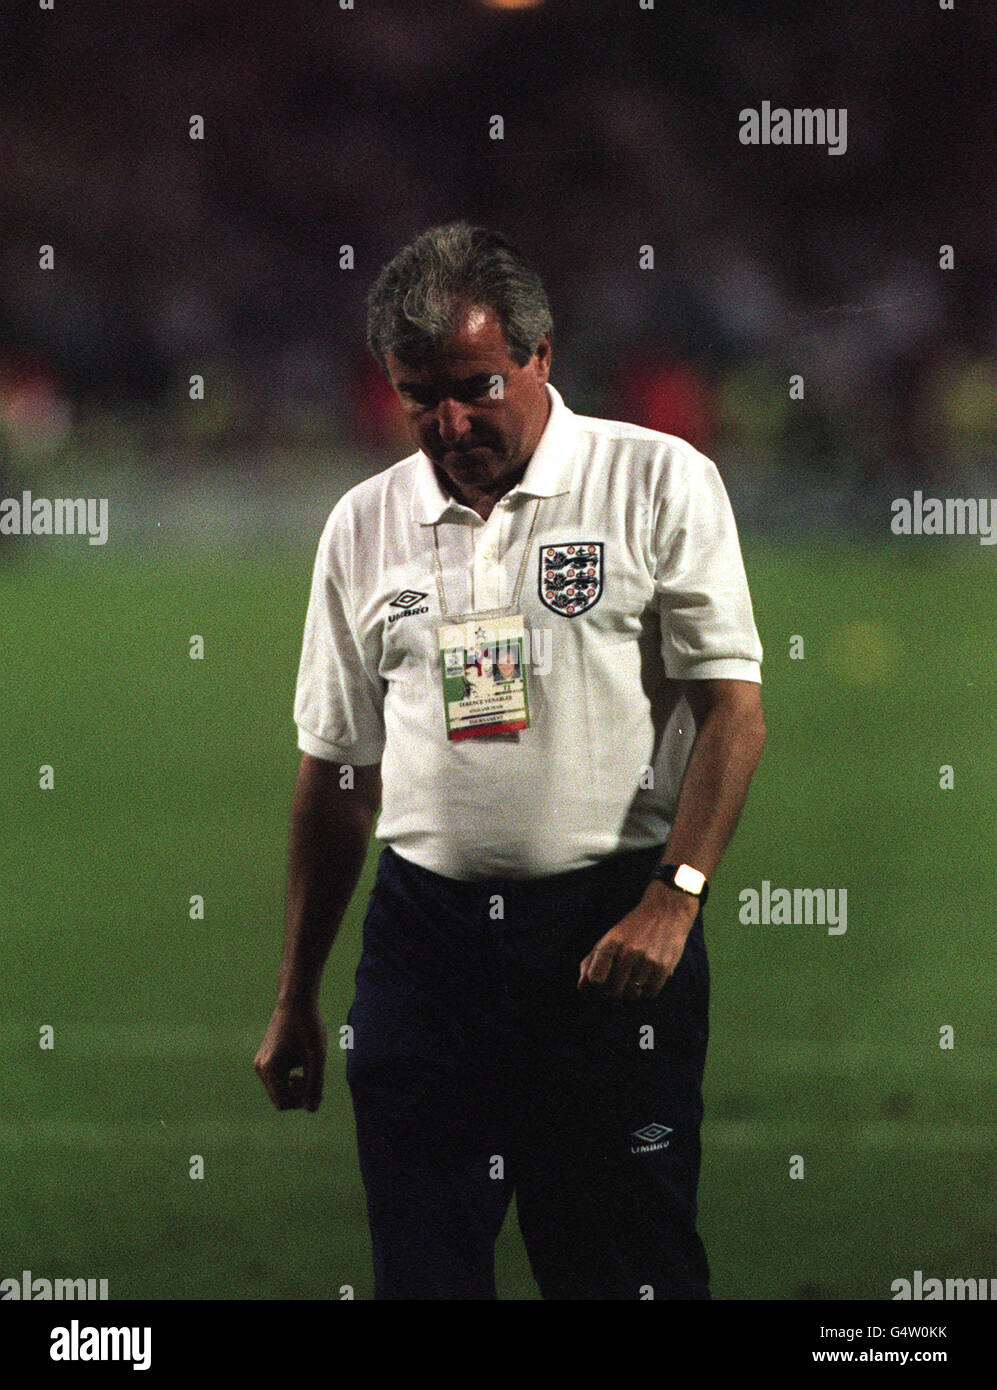 England coach Terry Venables leaves the pitch after the penalty shoot out which ended England's chances in the Euro '96 semi-final against Germany at Wembley. Stock Photo